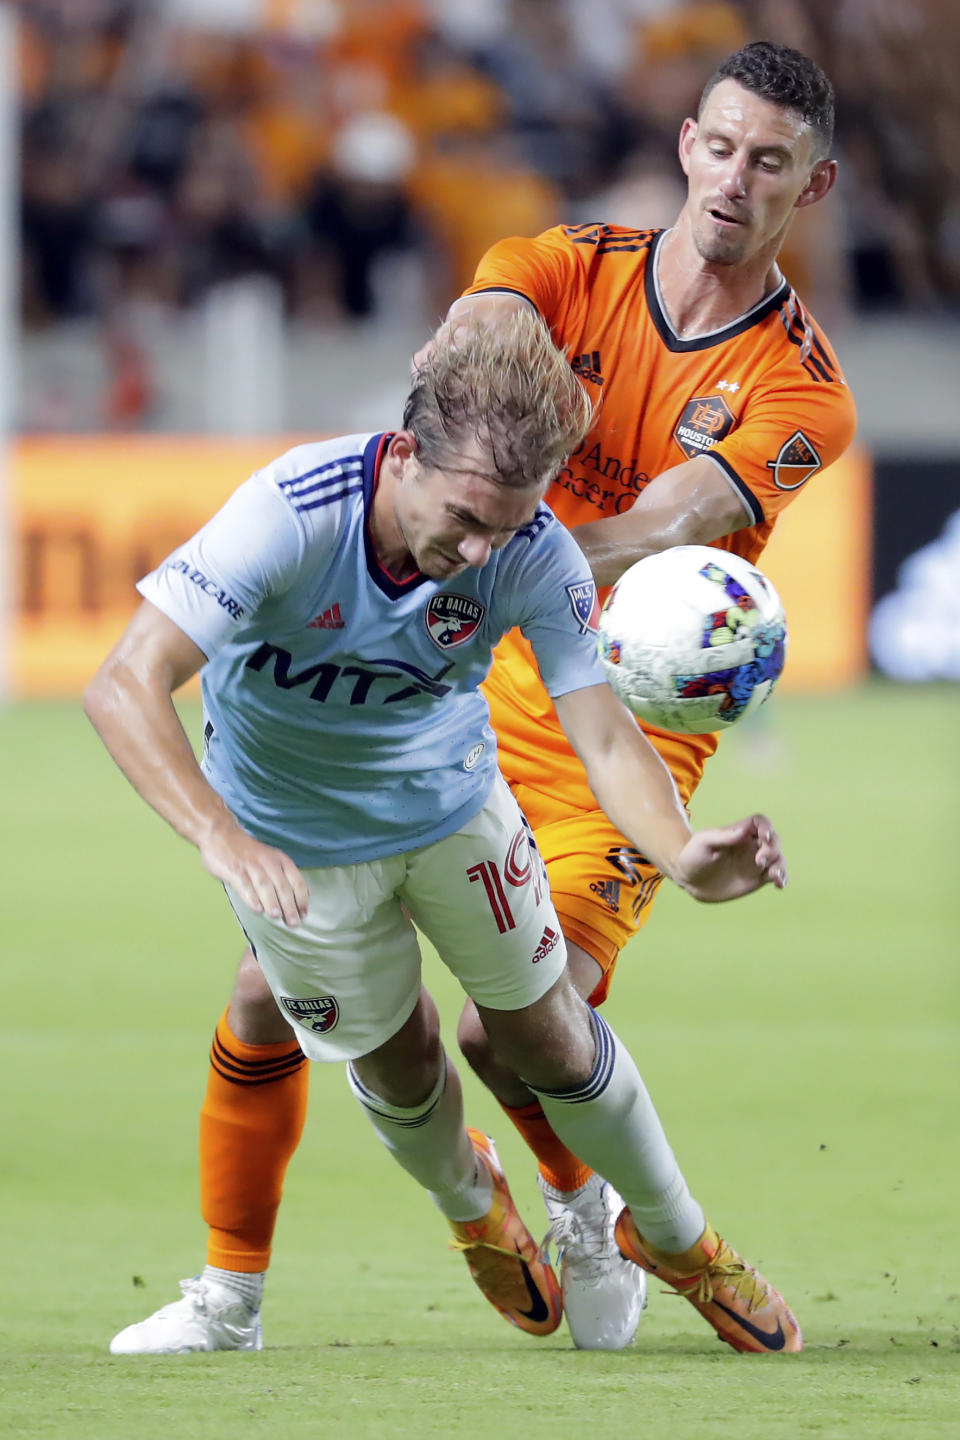 FC Dallas midfielder Paxton Pomykal (19) is pushed by Houston Dynamo defender Daniel Steres, right, during the second half of an MLS soccer match Saturday, July 9, 2022, in Houston. (AP Photo/Michael Wyke)